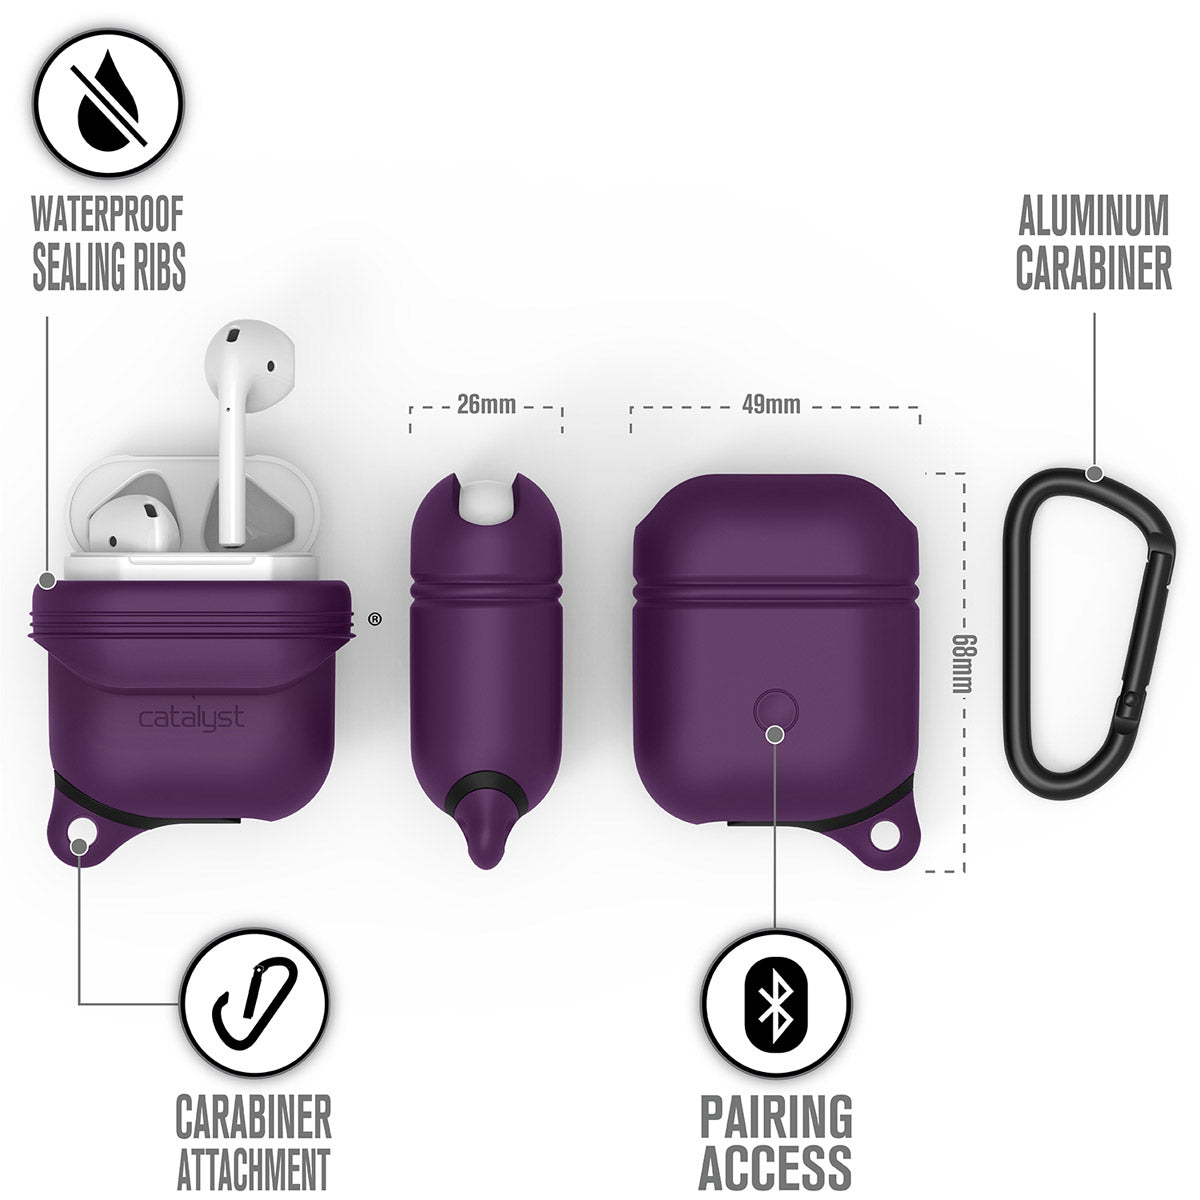 CATAPDPPL | Catalyst airpods gen2/1 waterproof case + carabiner showing the case dimension and features in deep plum text reads waterproof sealing ribs aluminum carabiner pairing access carabiner attachment